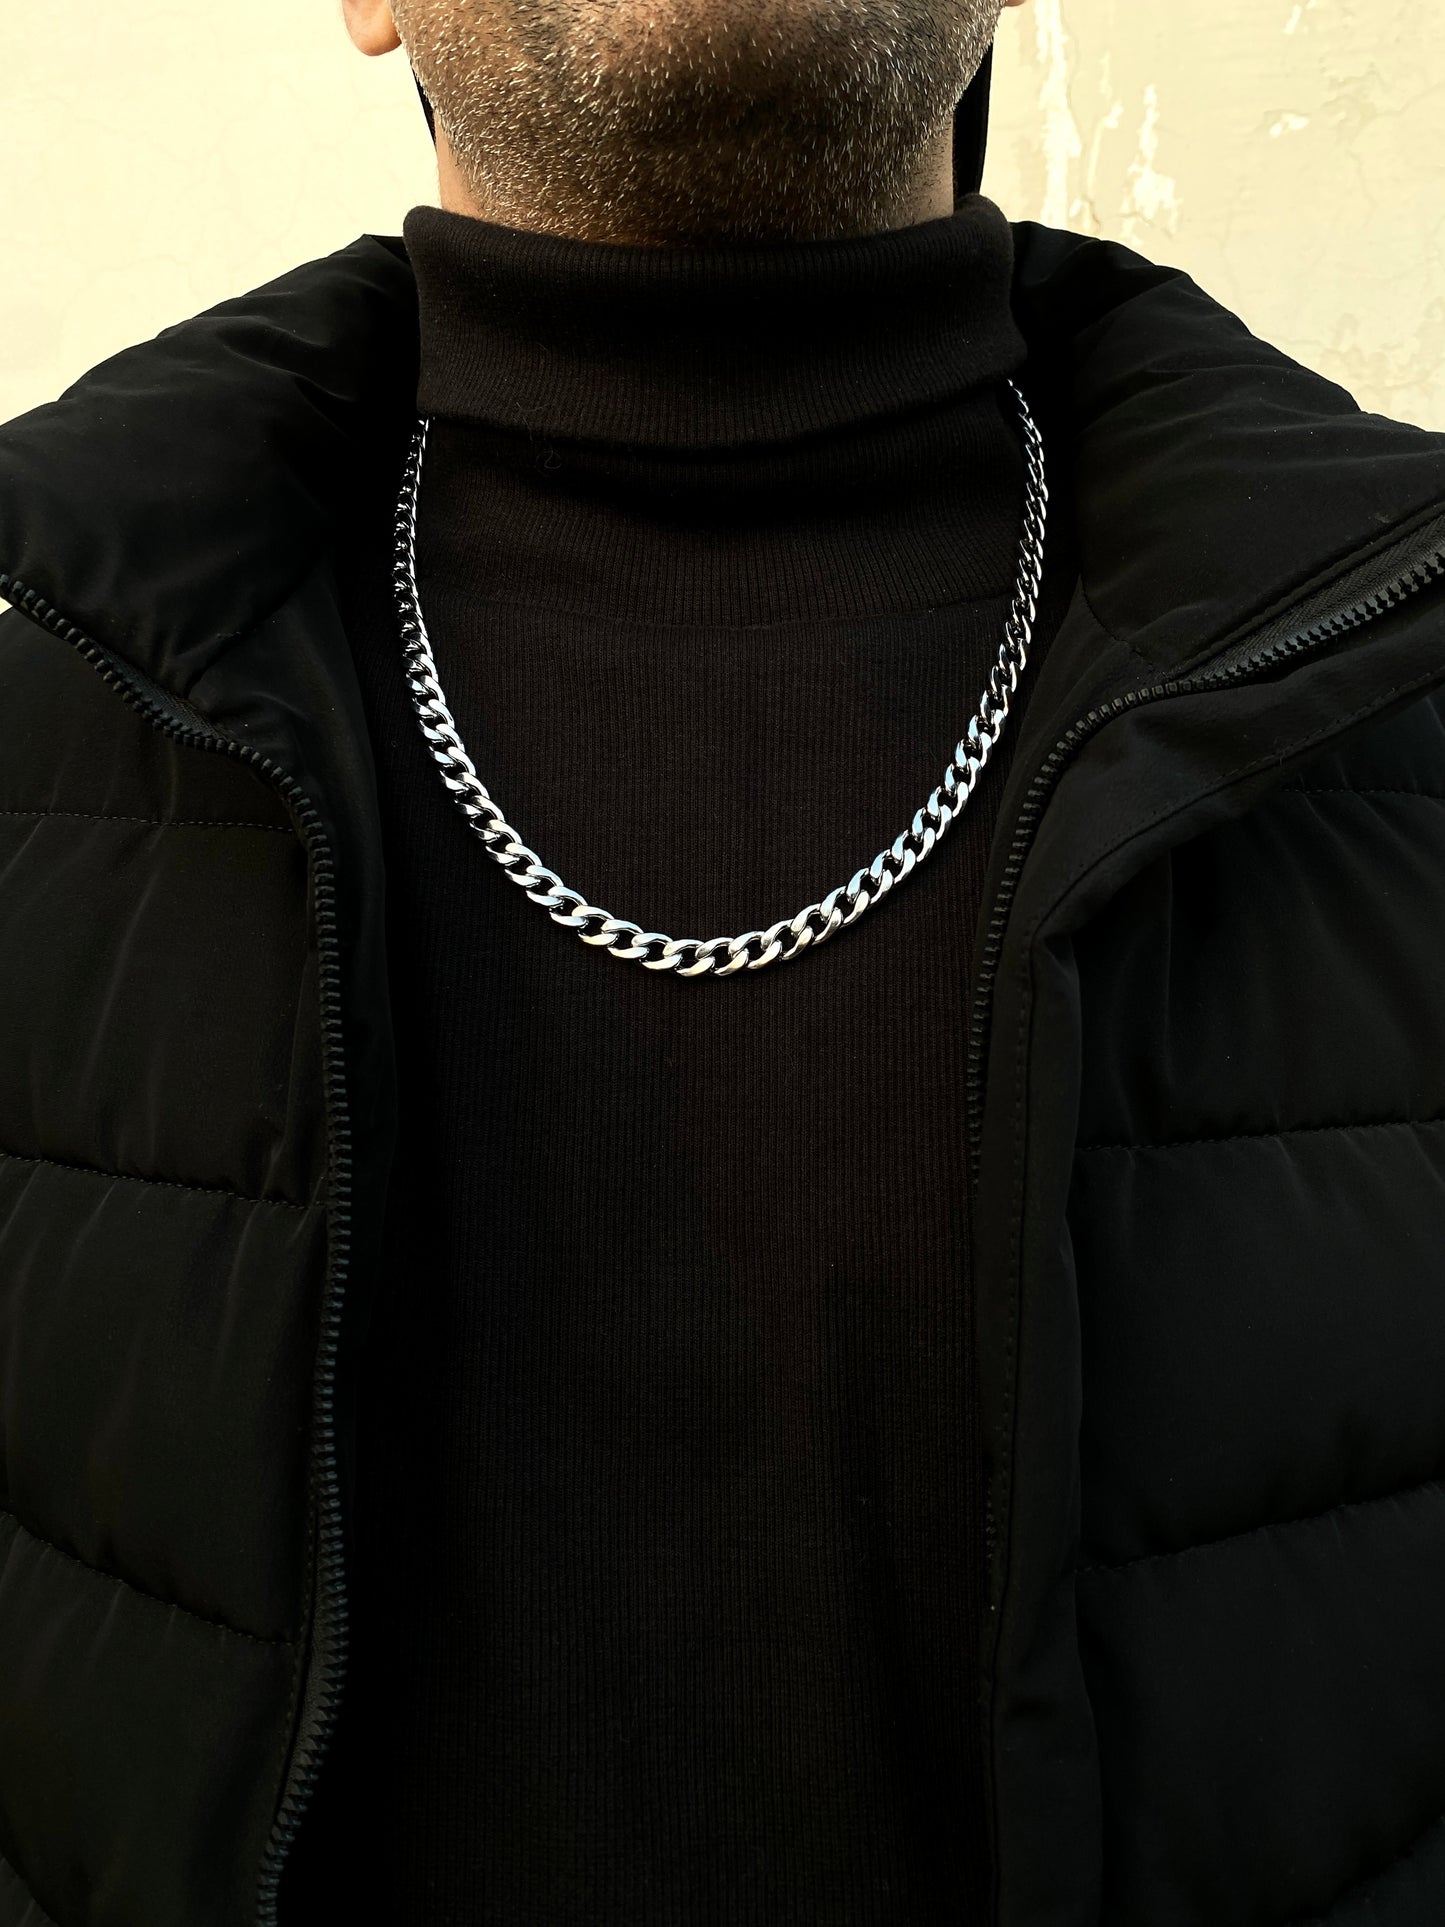 Cuban-Link Stainless Steel Chain.